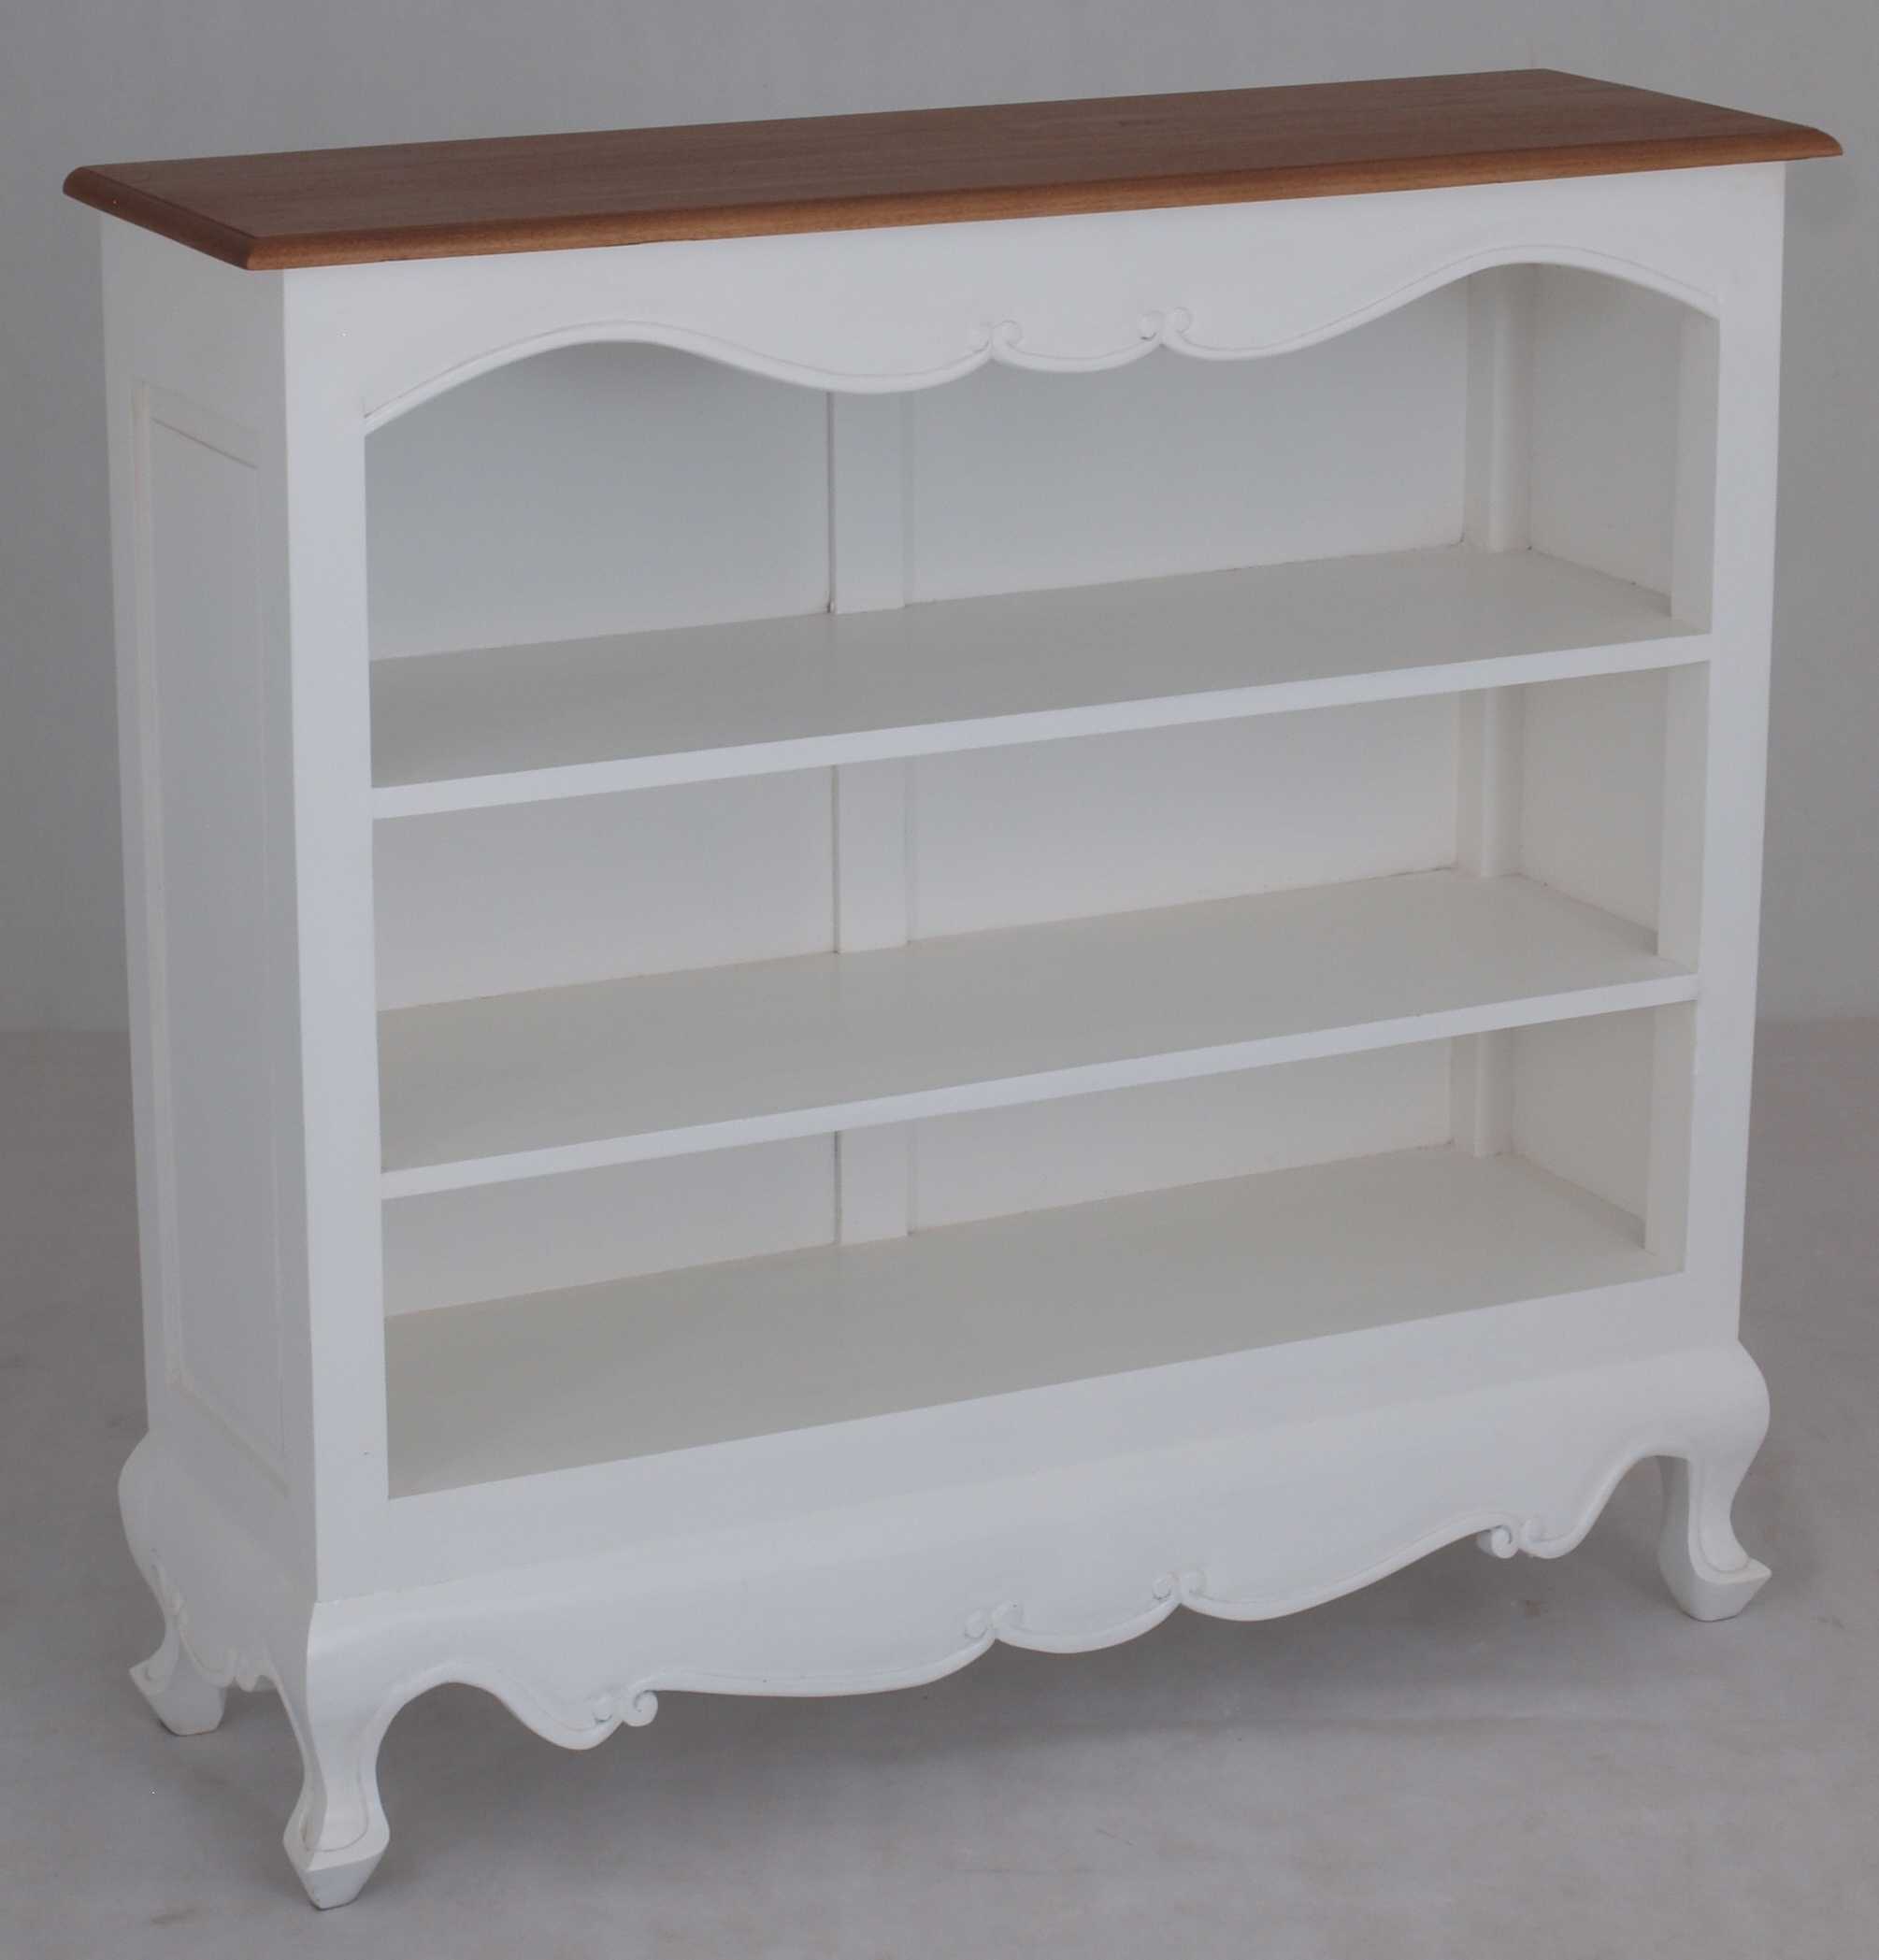 CT Queen Ann Solid Timber Bookcase - Small